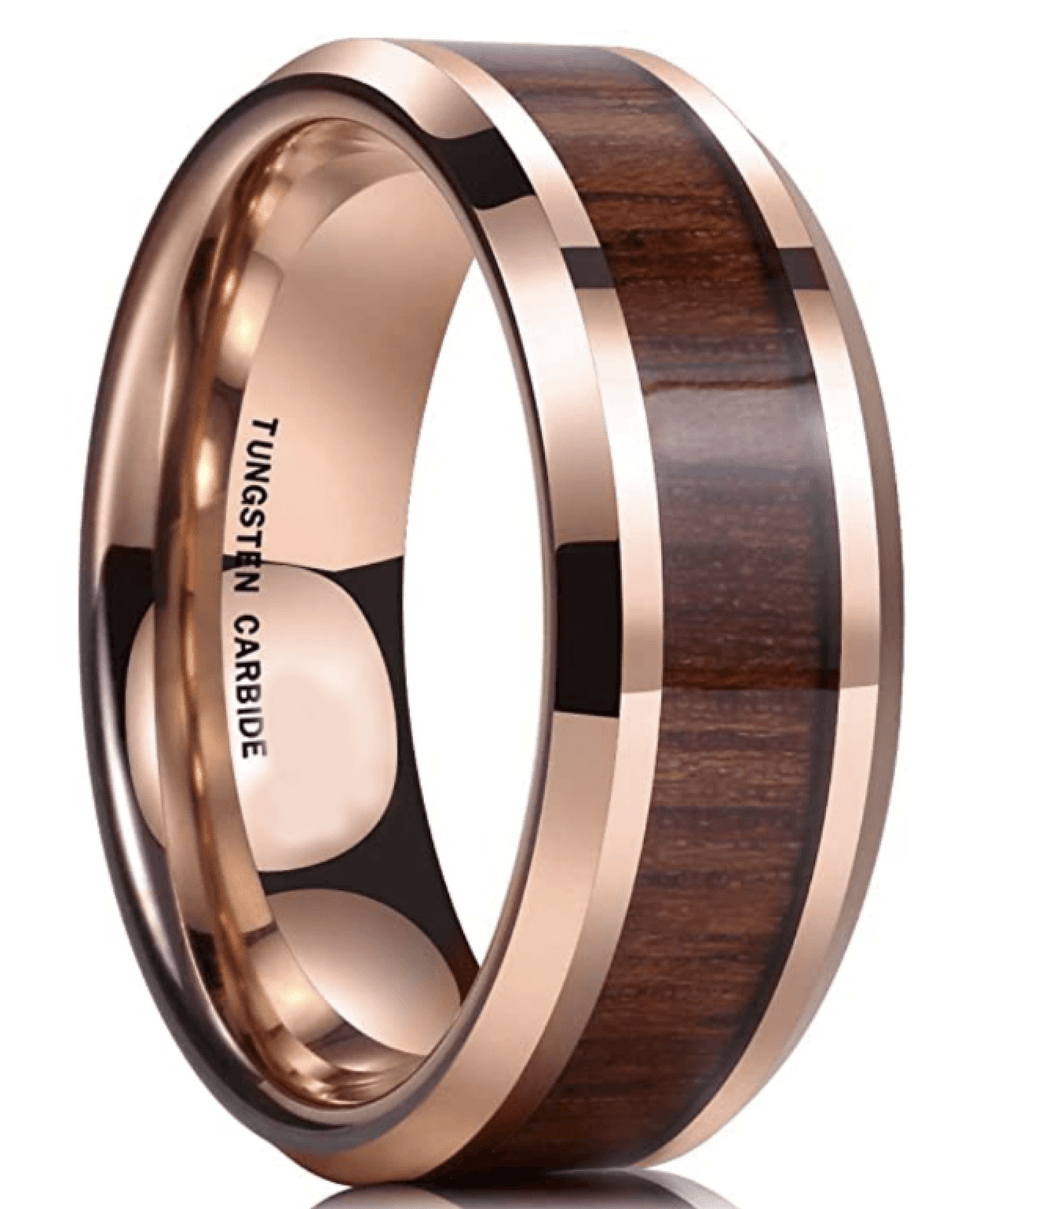 Tungsten Rings for Men Wedding Bands for Him Womens Wedding Bands for Her 8mm Natural Koa Wood Inlay - Jewelry Store by Erik Rayo